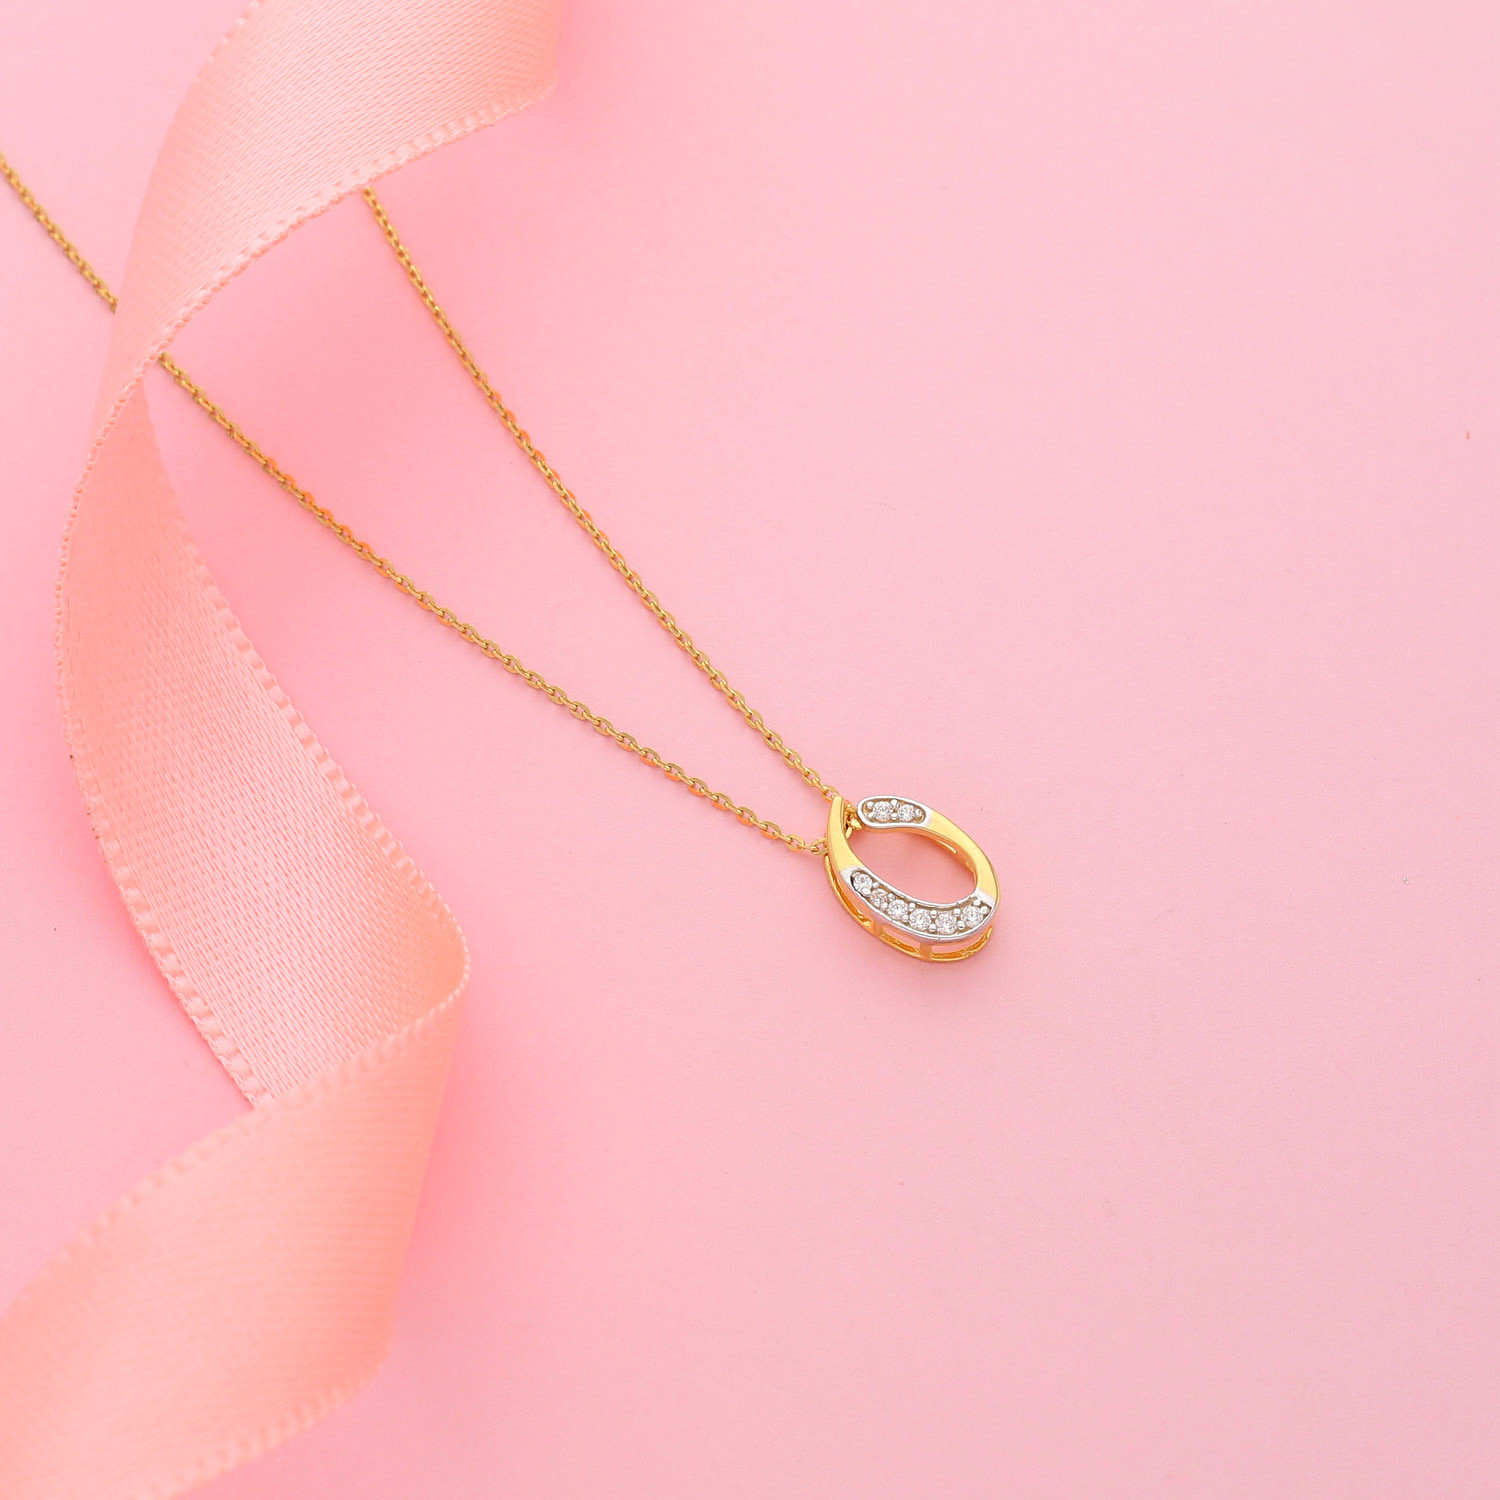 Buy Initial o Necklace 14k White and Yellow Gold, Diamonds 0.13 Carats  Personalized Letter Necklace for Women, Gold Jewelry, Gift Online in India  - Etsy